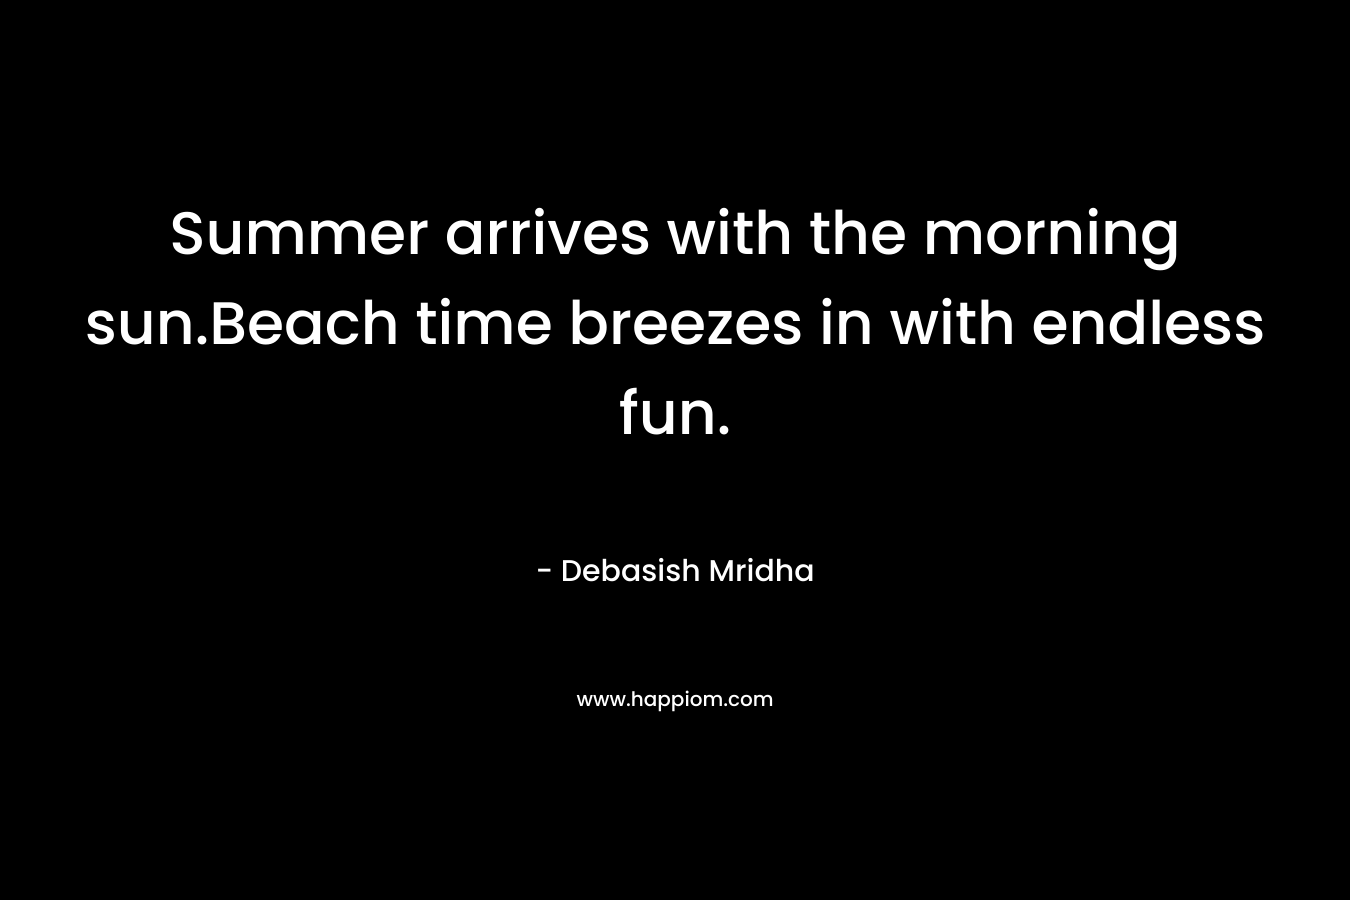 Summer arrives with the morning sun.Beach time breezes in with endless fun. – Debasish Mridha